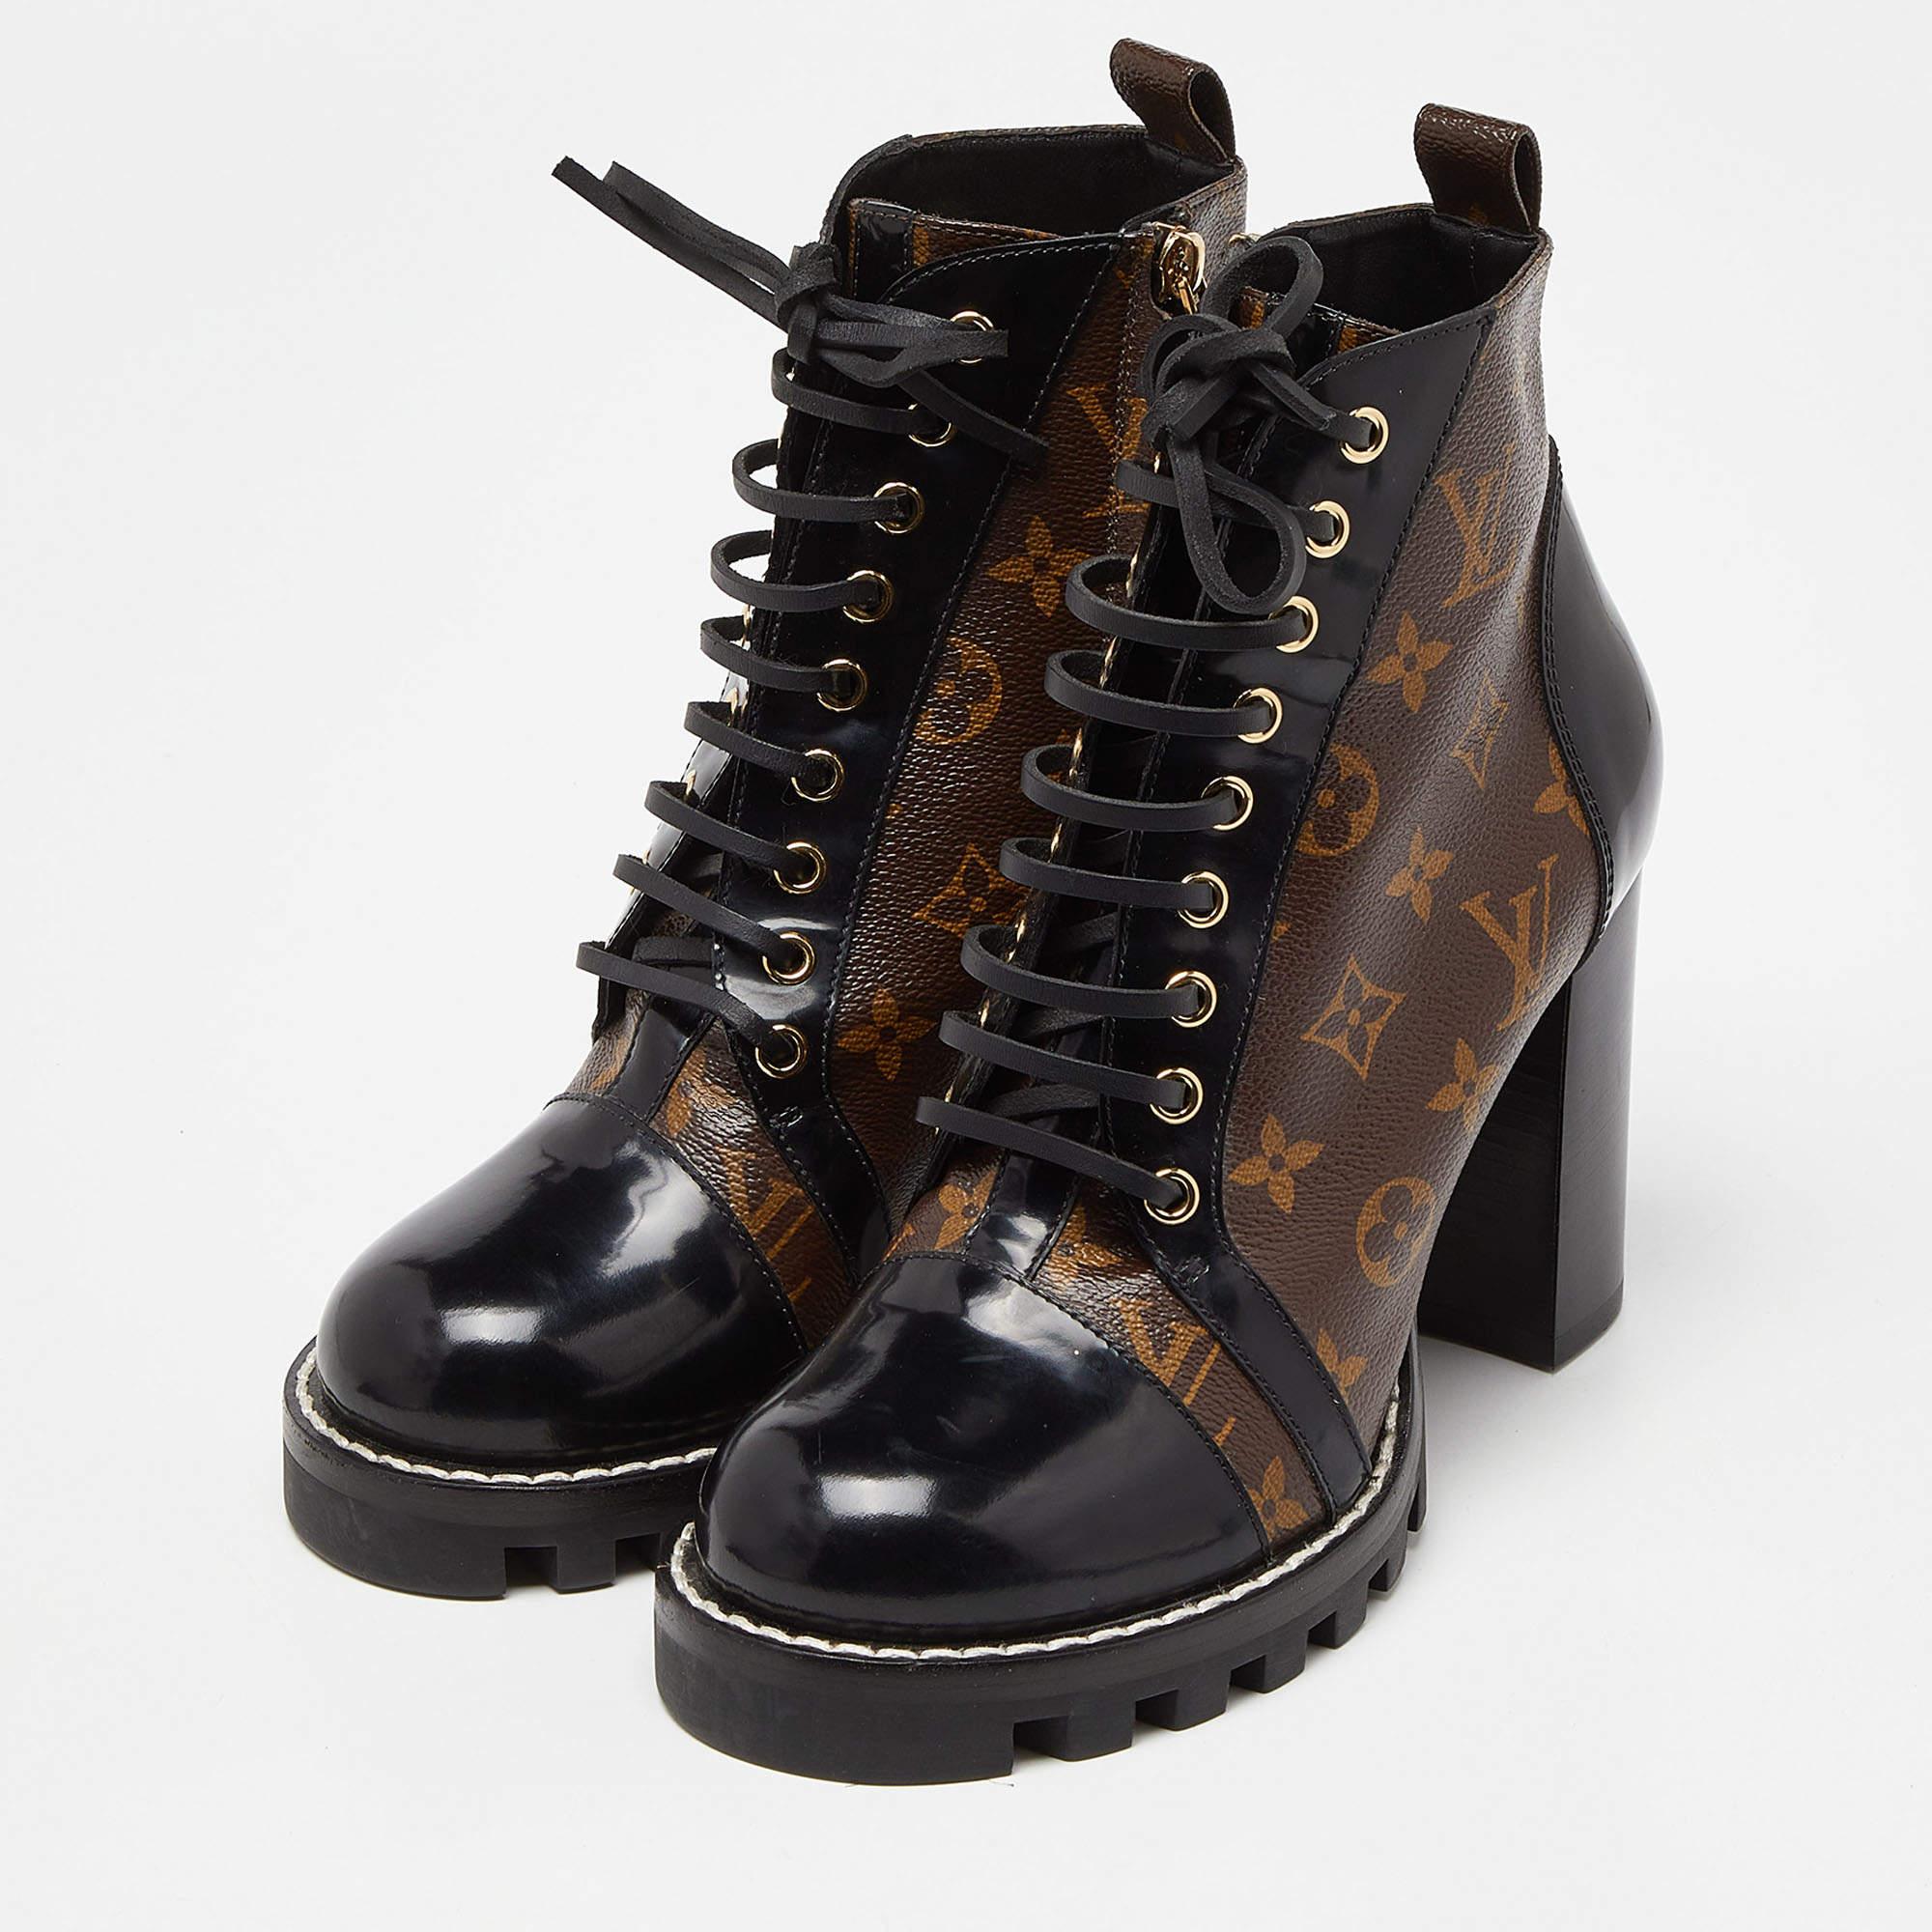 These Louis Vuitton Star Trail ankle boots exude a rock-chic flair. Crafted from patent leather and monogram canvas, they are styled with laces, block heels supported by sporty platforms. These stunning boots are complete with comfortable insoles